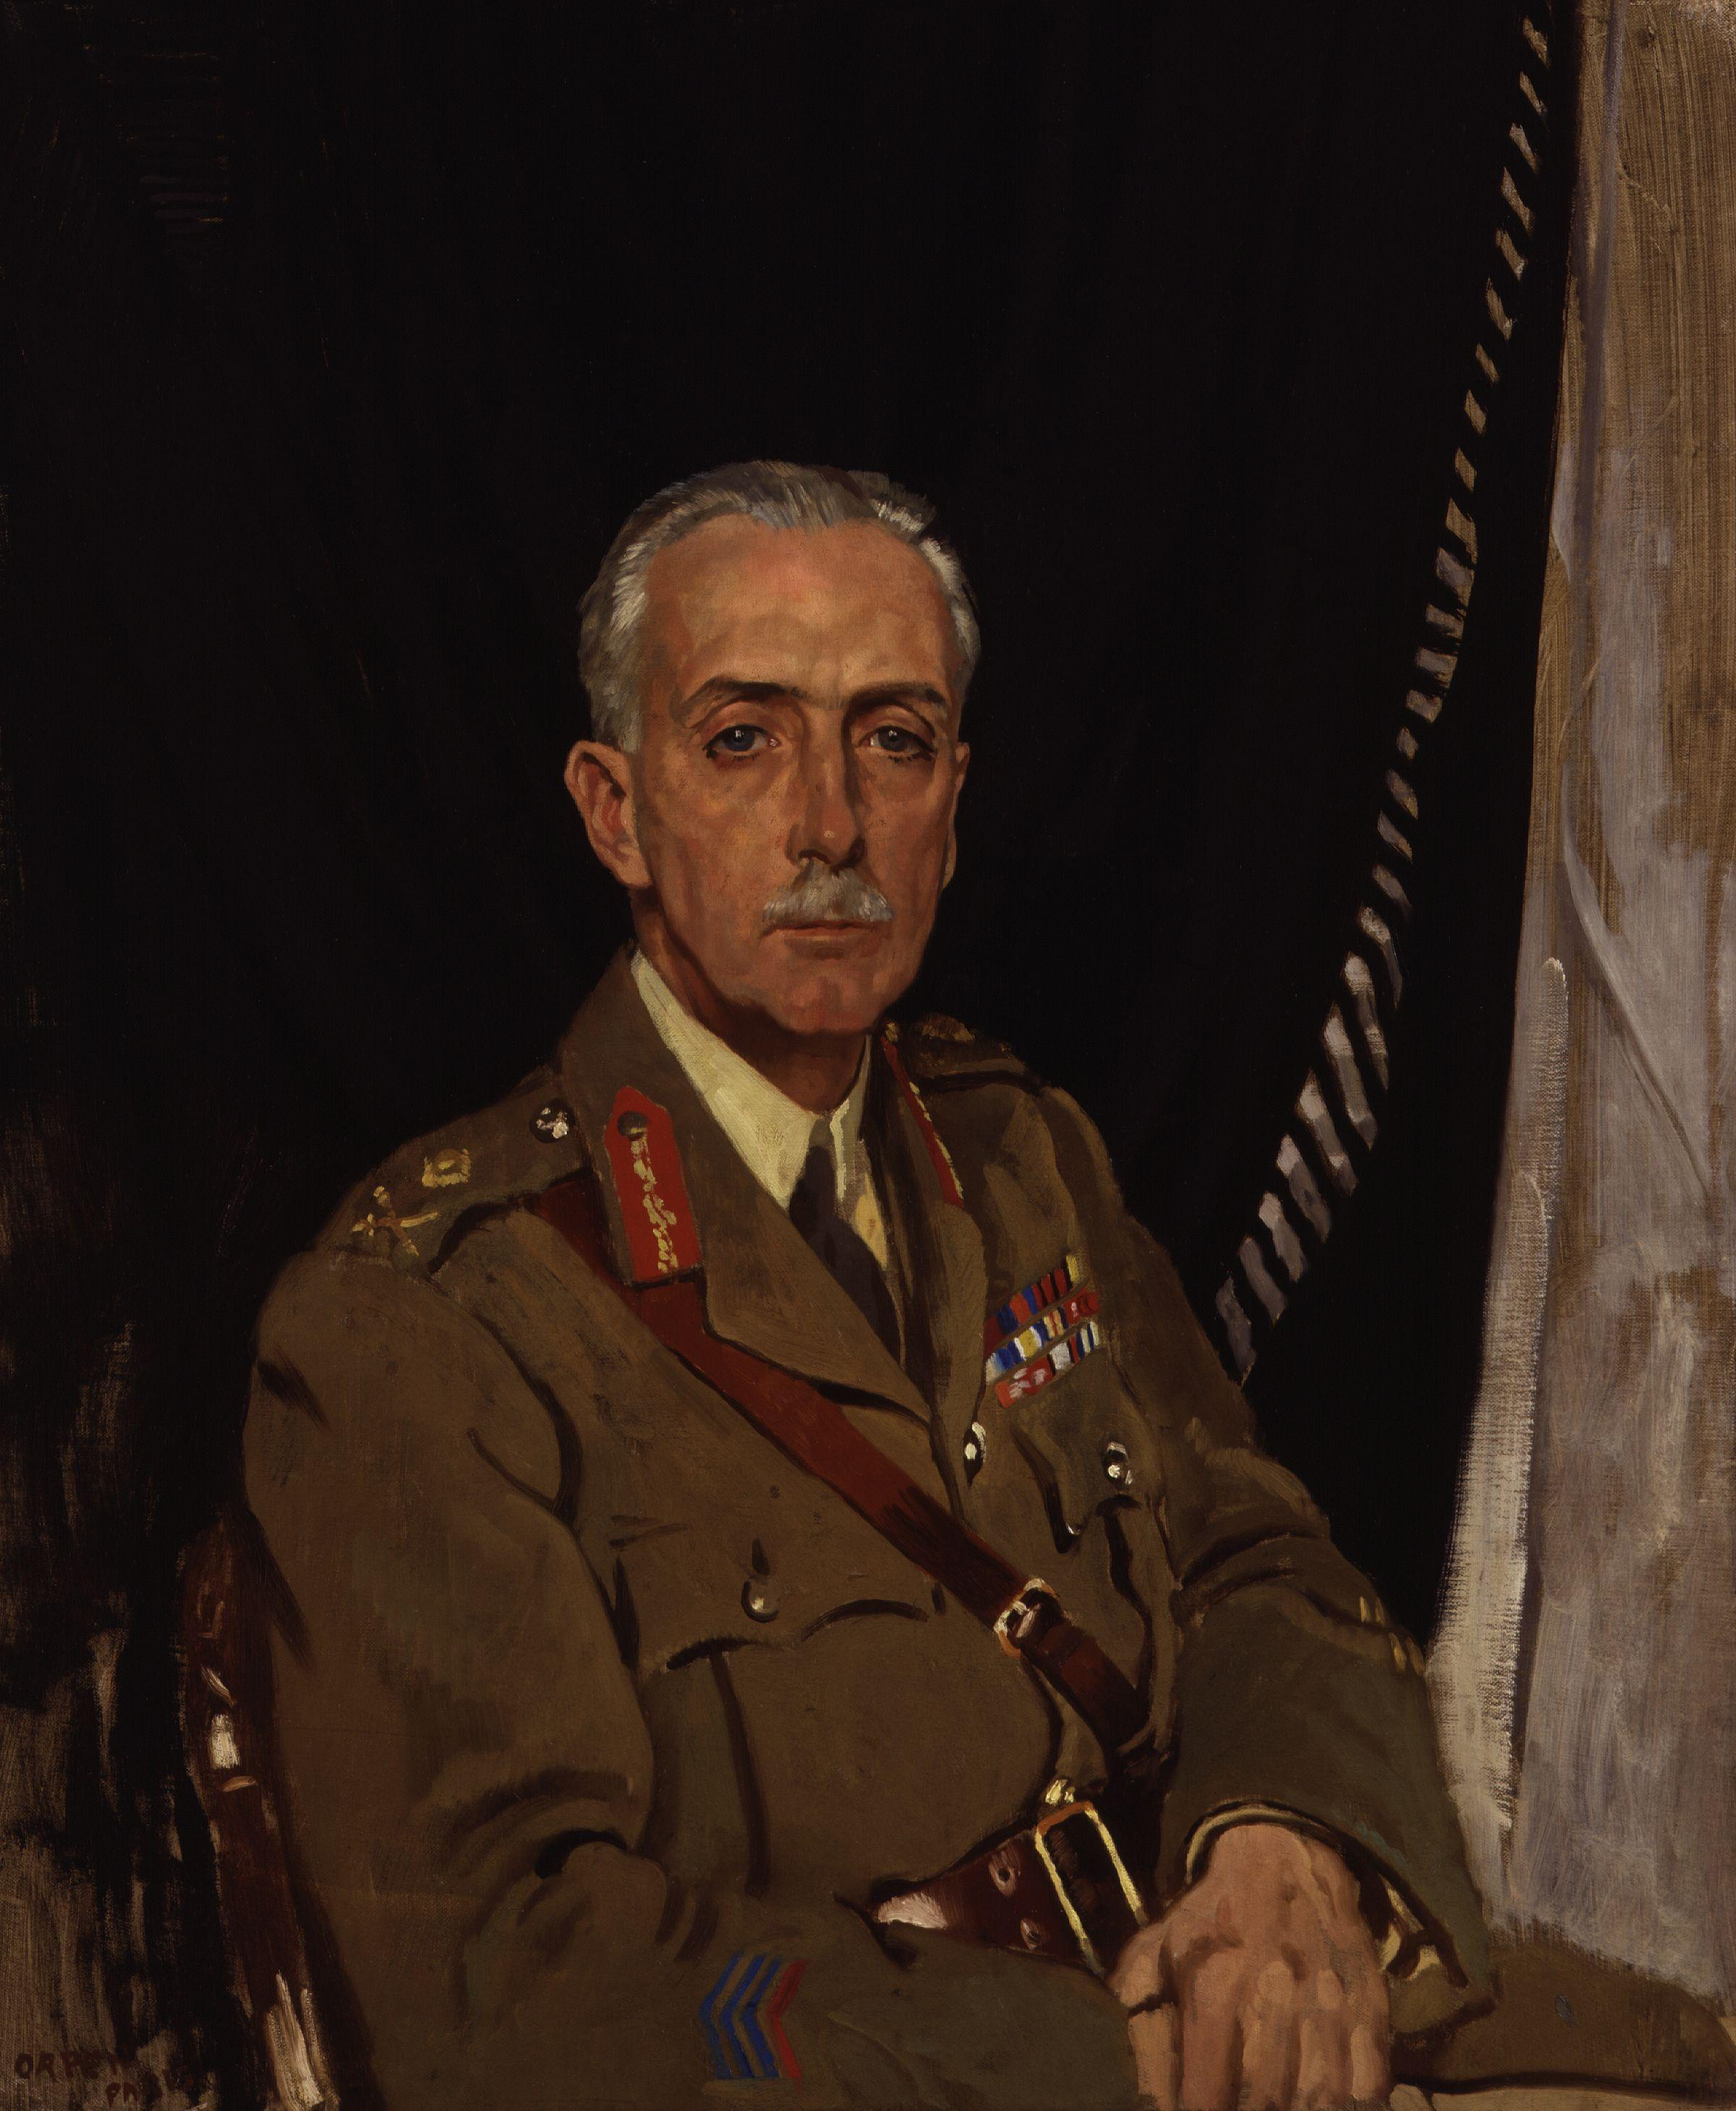 Charles Sackville-West, 4th Baron Sackville by Sir William Orpen